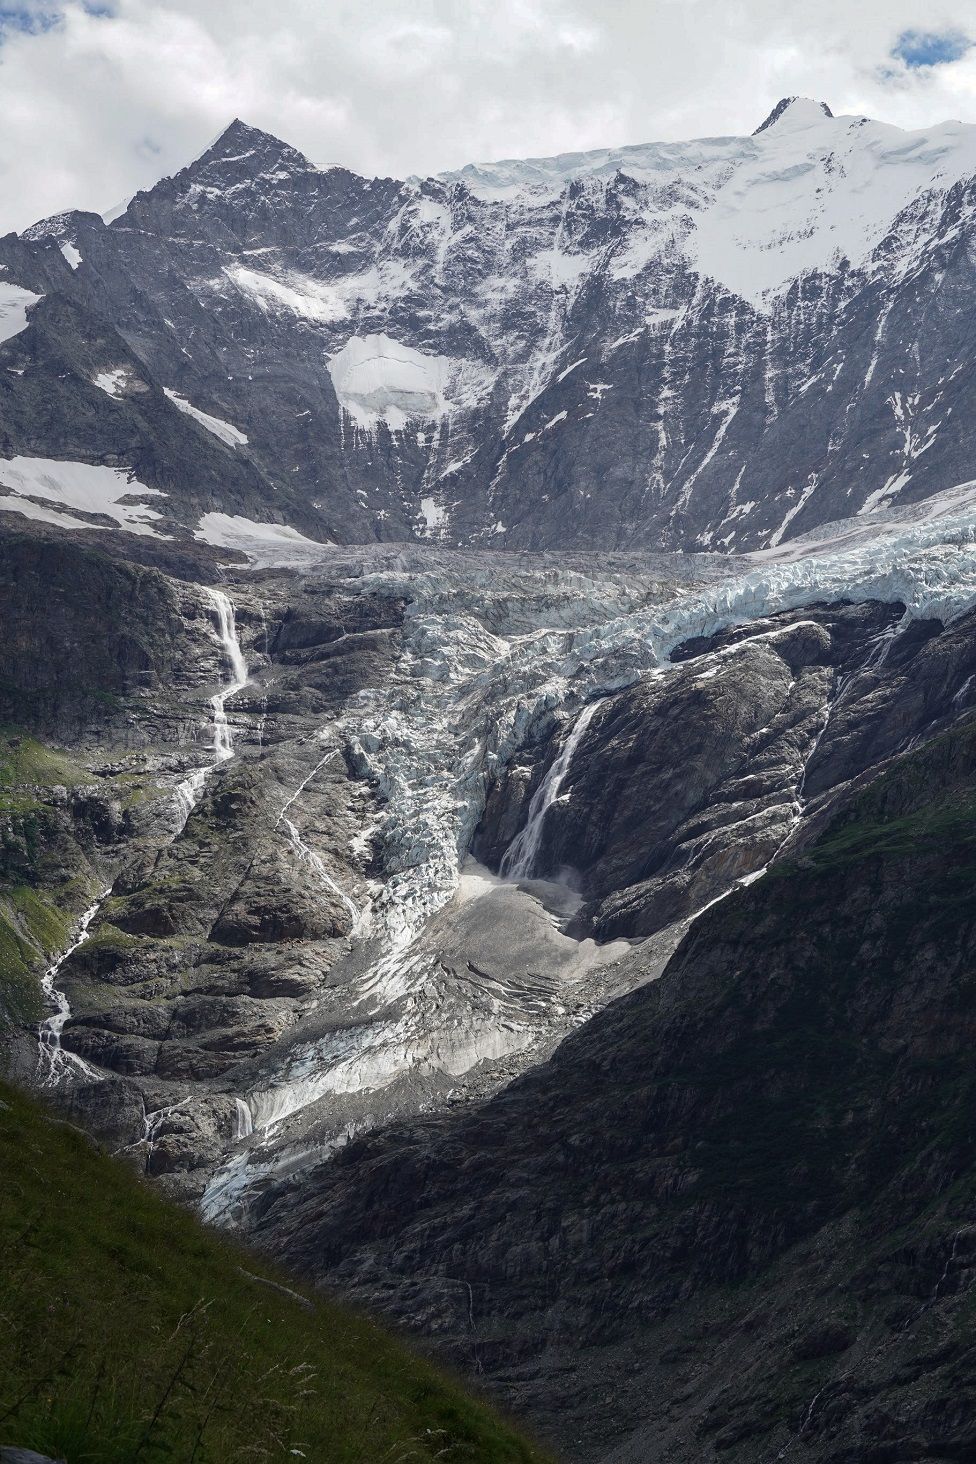 An view of a deep gorge and a glacier